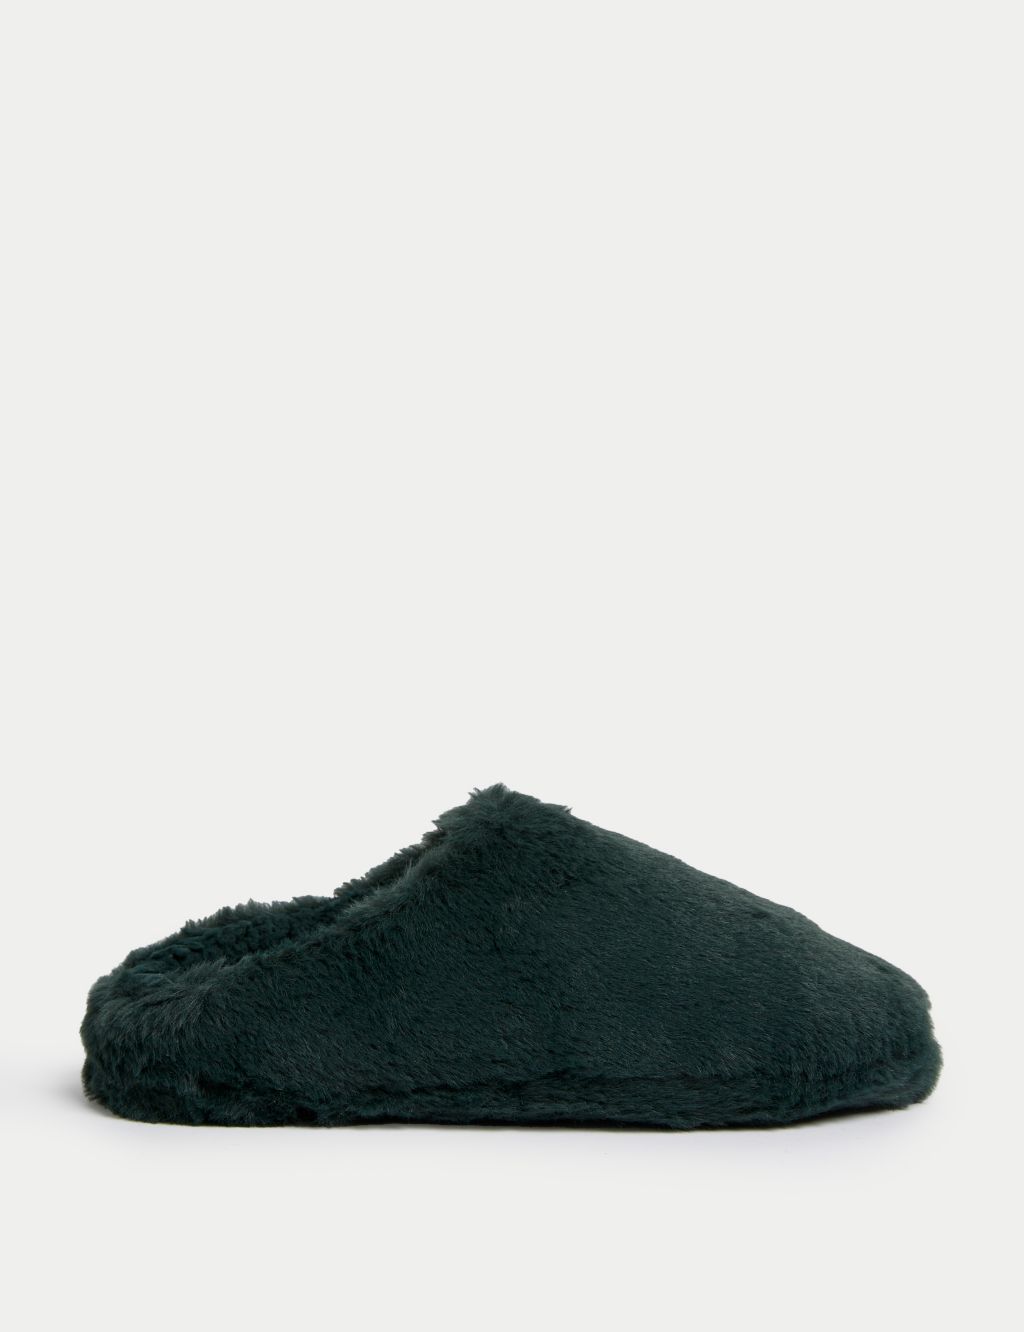 Kids' Faux Fur Slippers (13 Small - 7 large) image 1